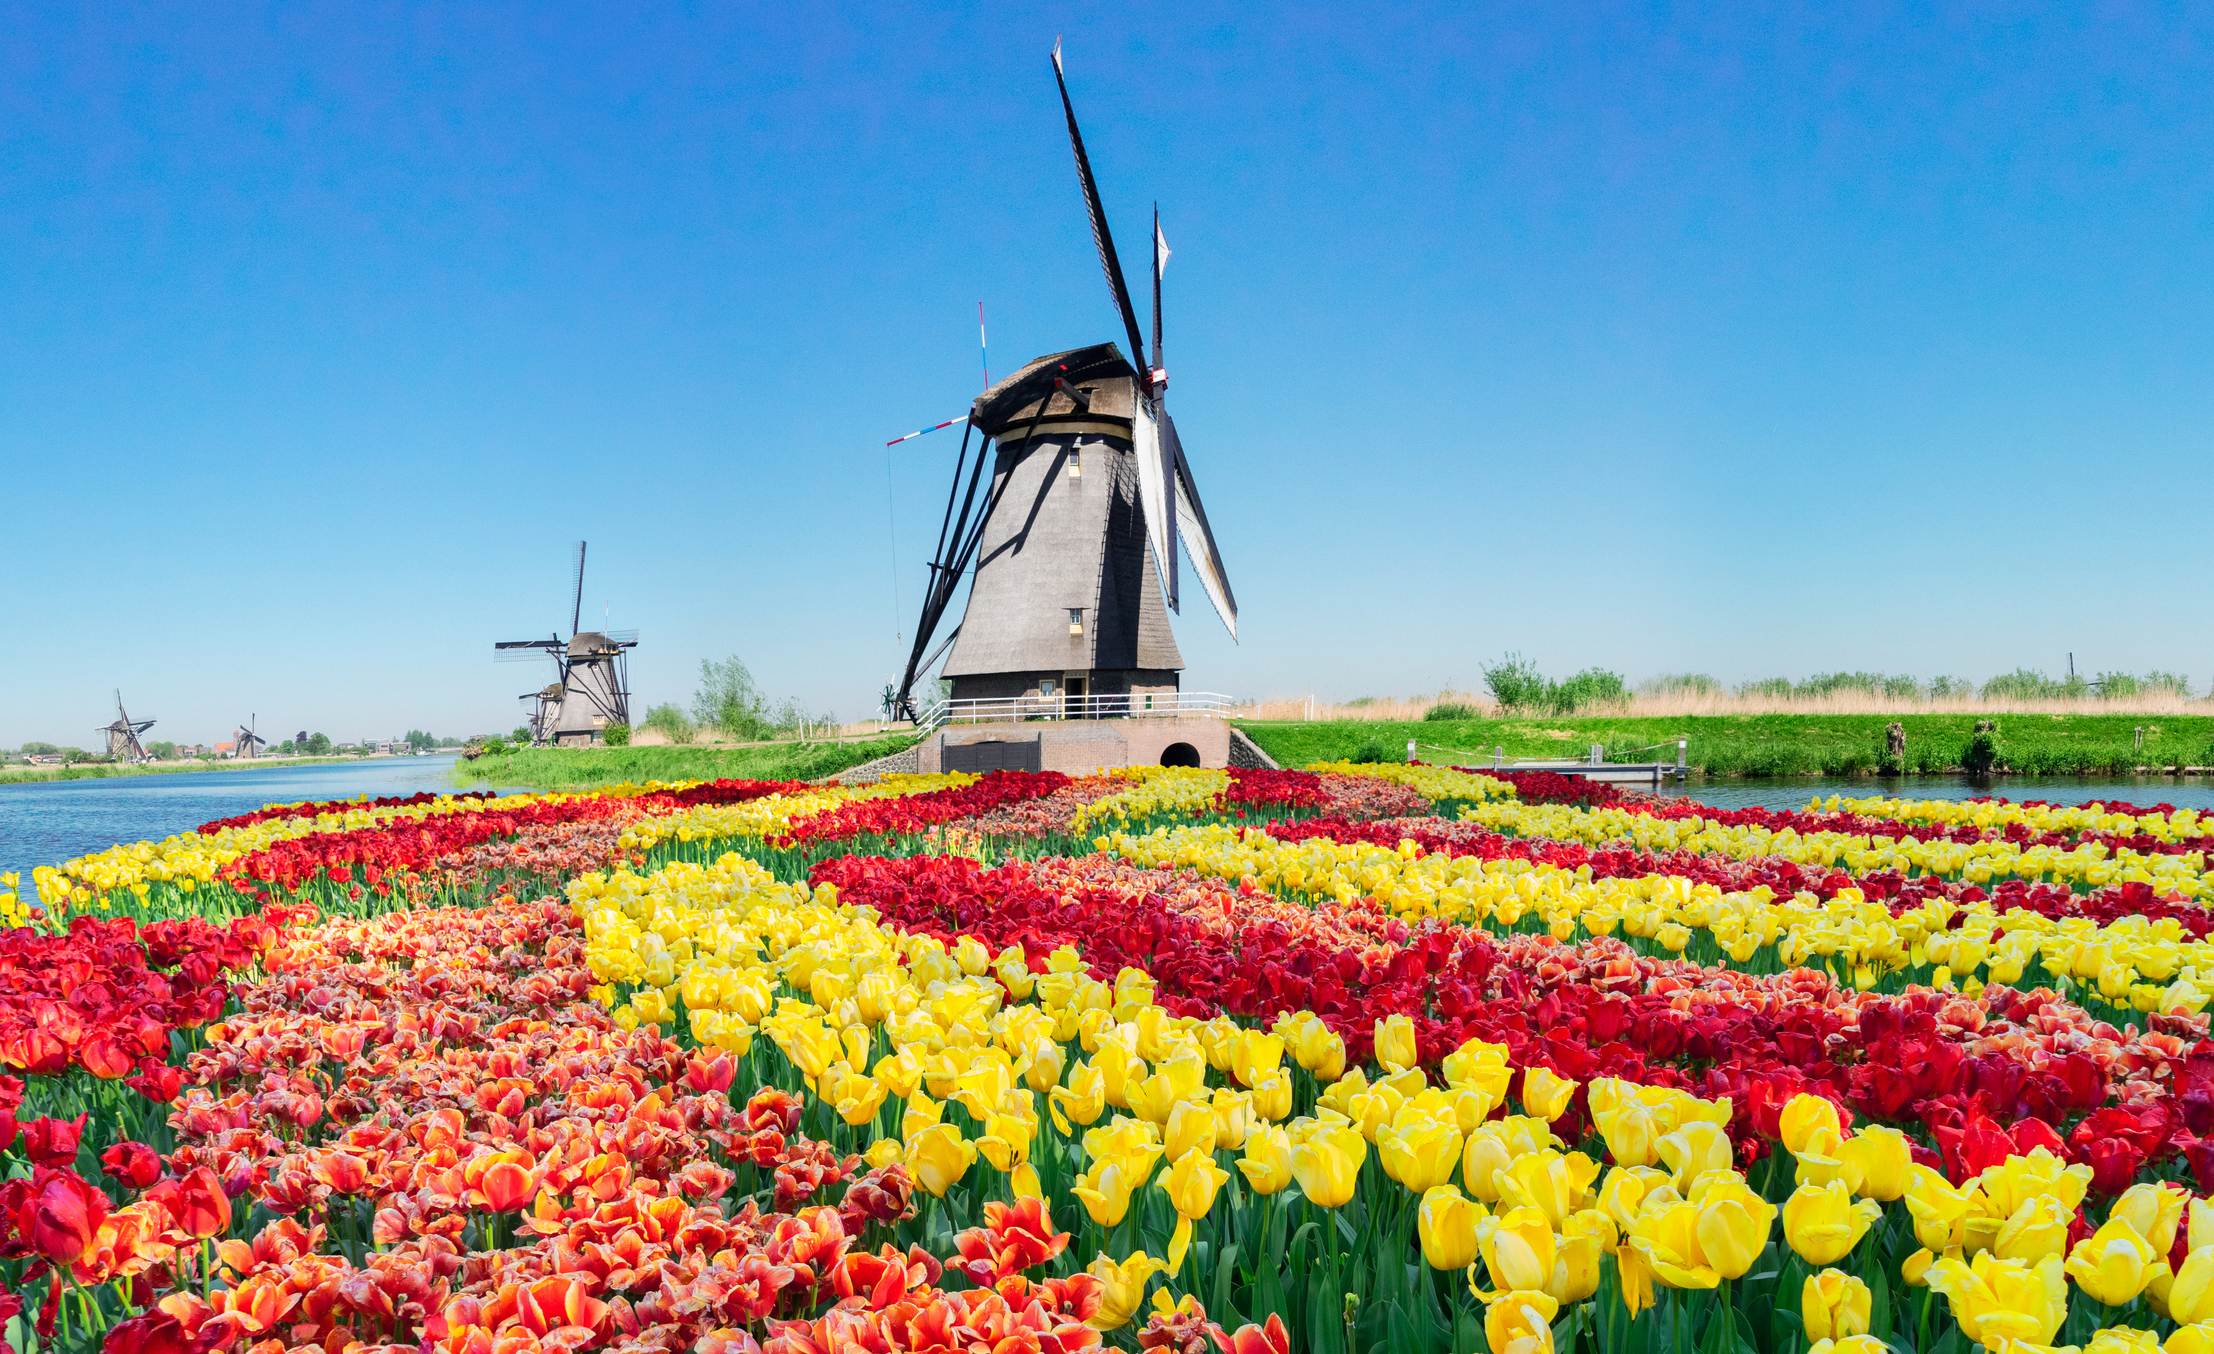 Windmills and tulips in Kinderdijk. The Netherlands is one of the world's top floral destinations (photo: neirfy, iStock license).